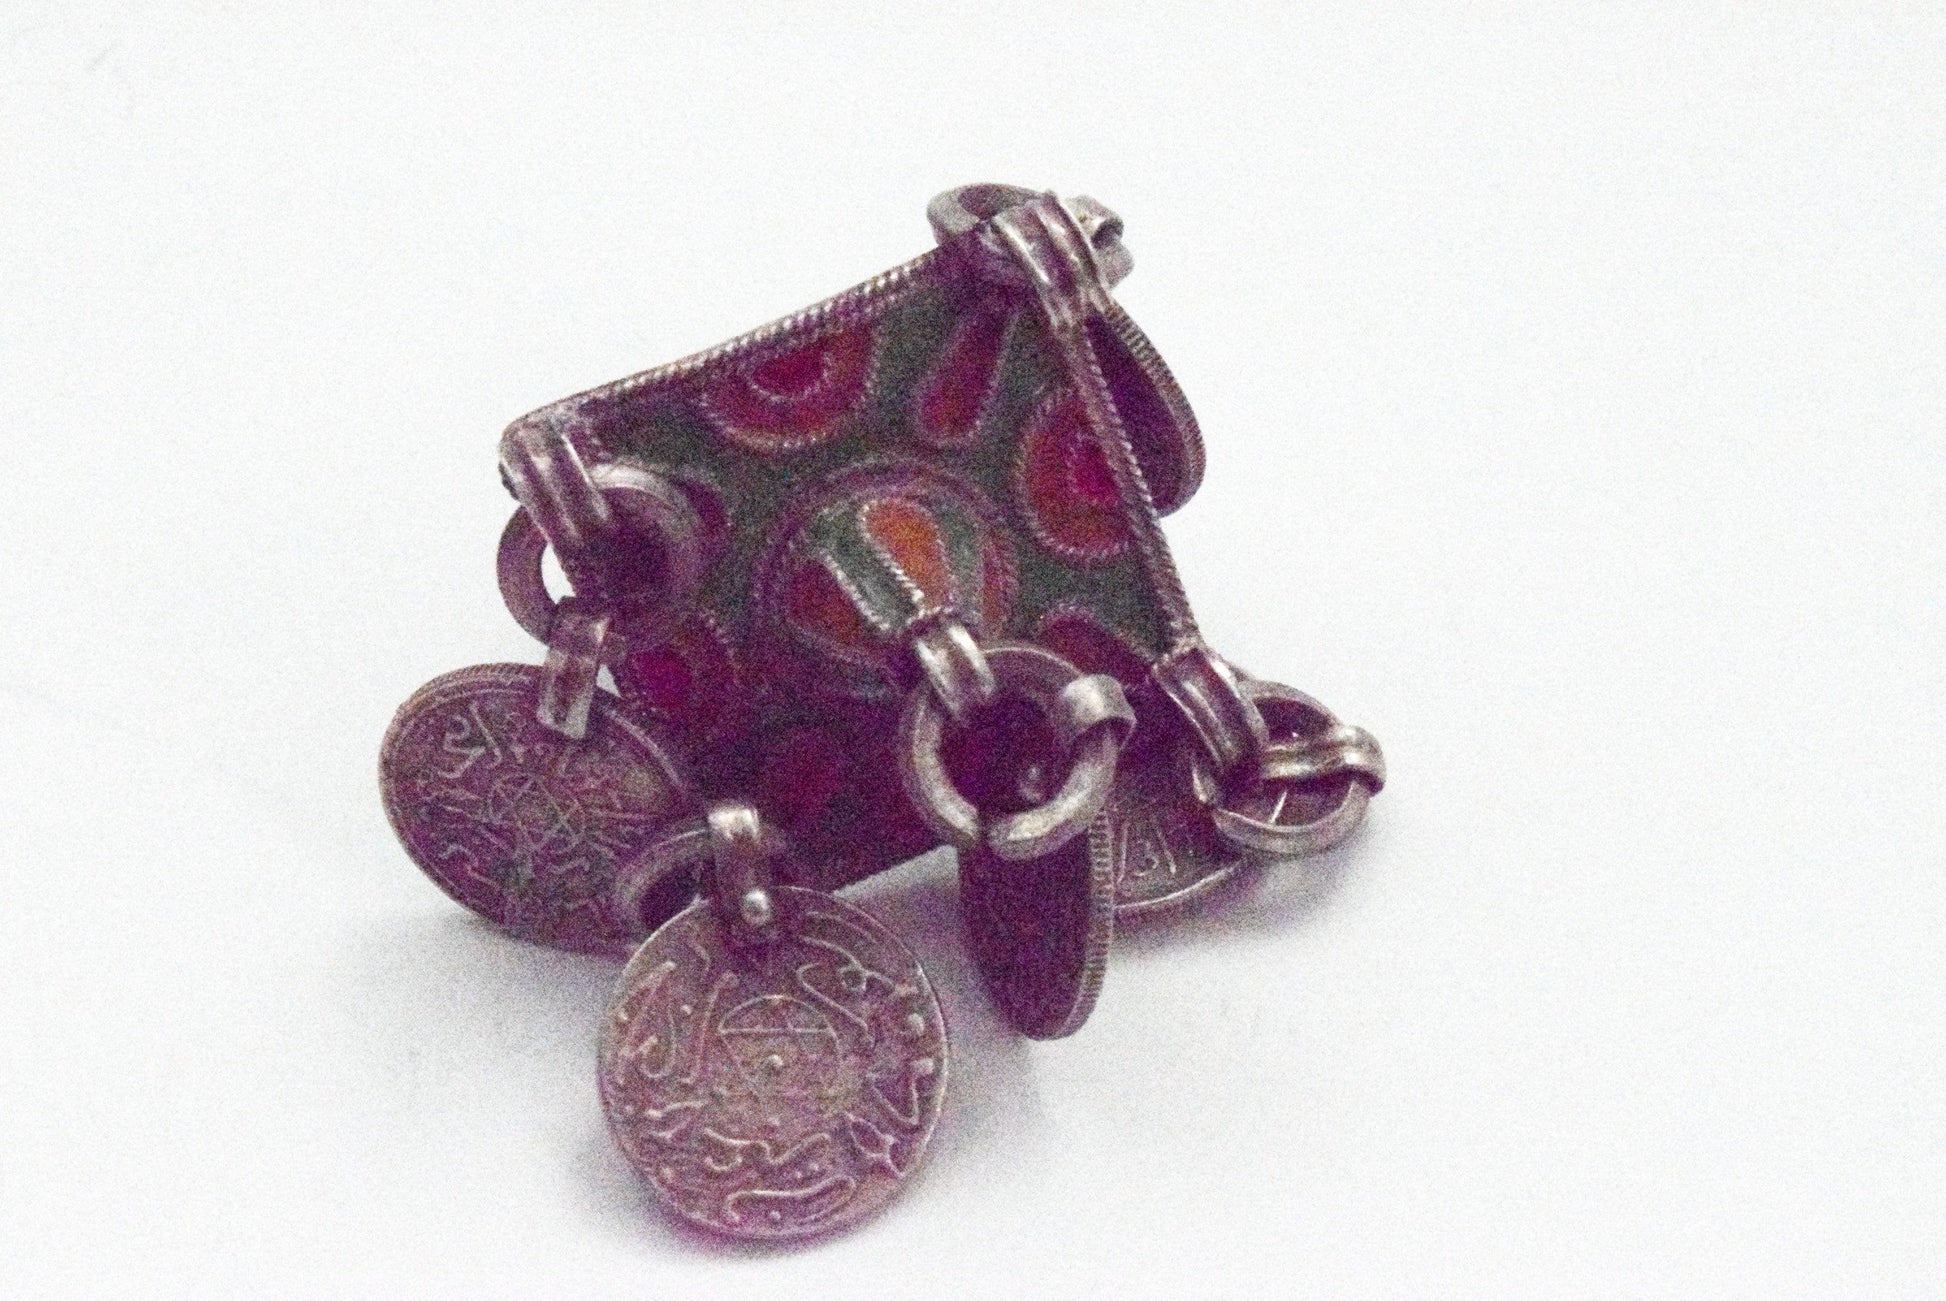 Vintage Silver and Enamel Moroccan Berber Ring with Coins - Anteeka